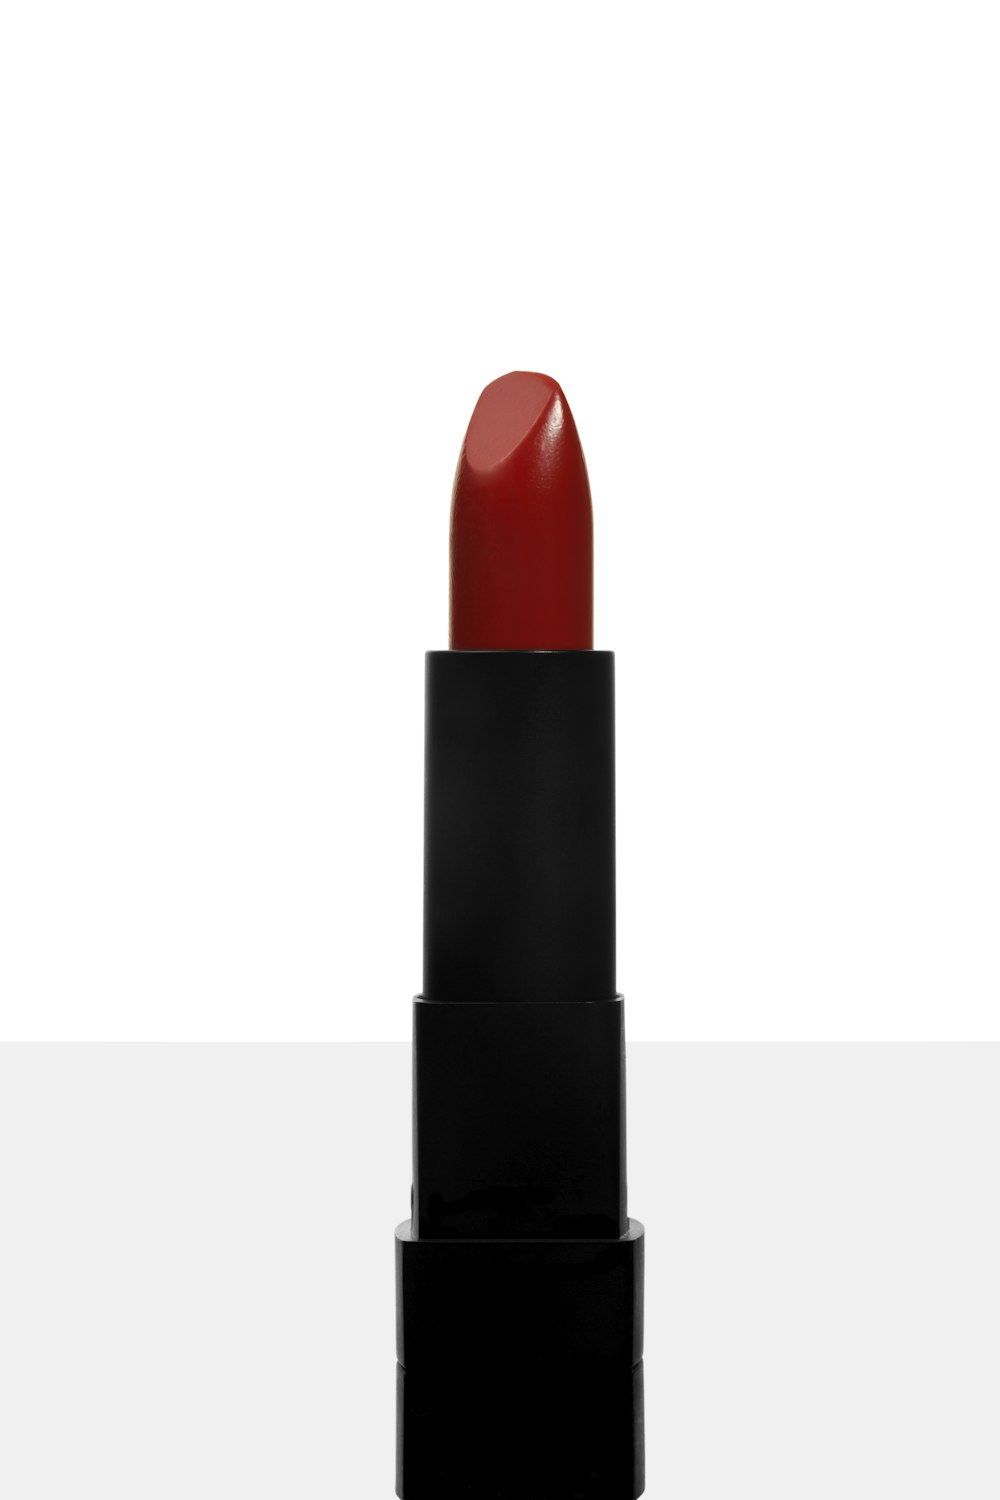 a red lipstick on a white surface